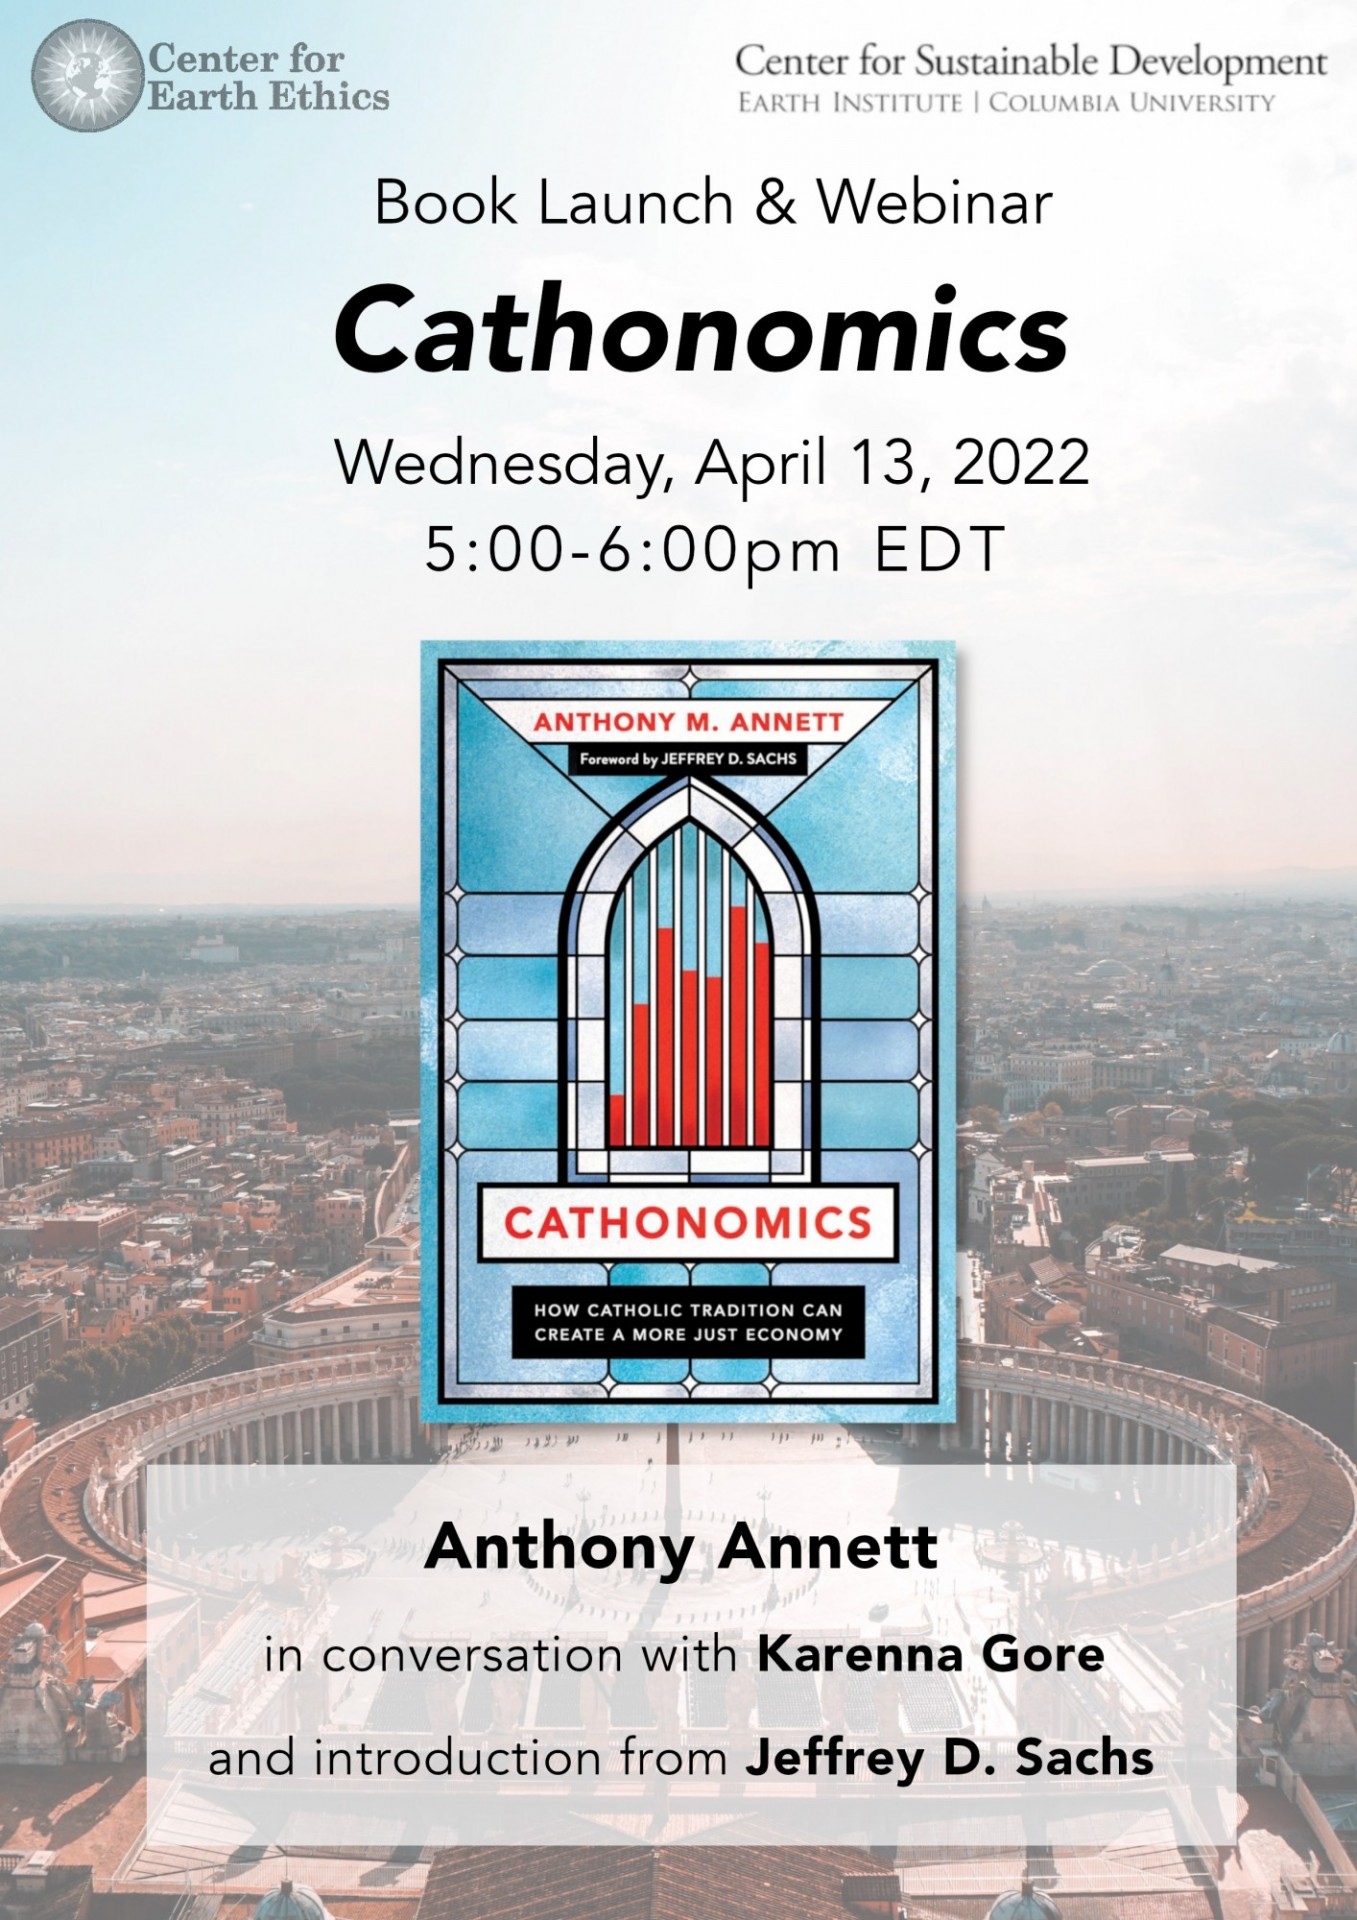 Cathonomics Book Cover and Event Flyer